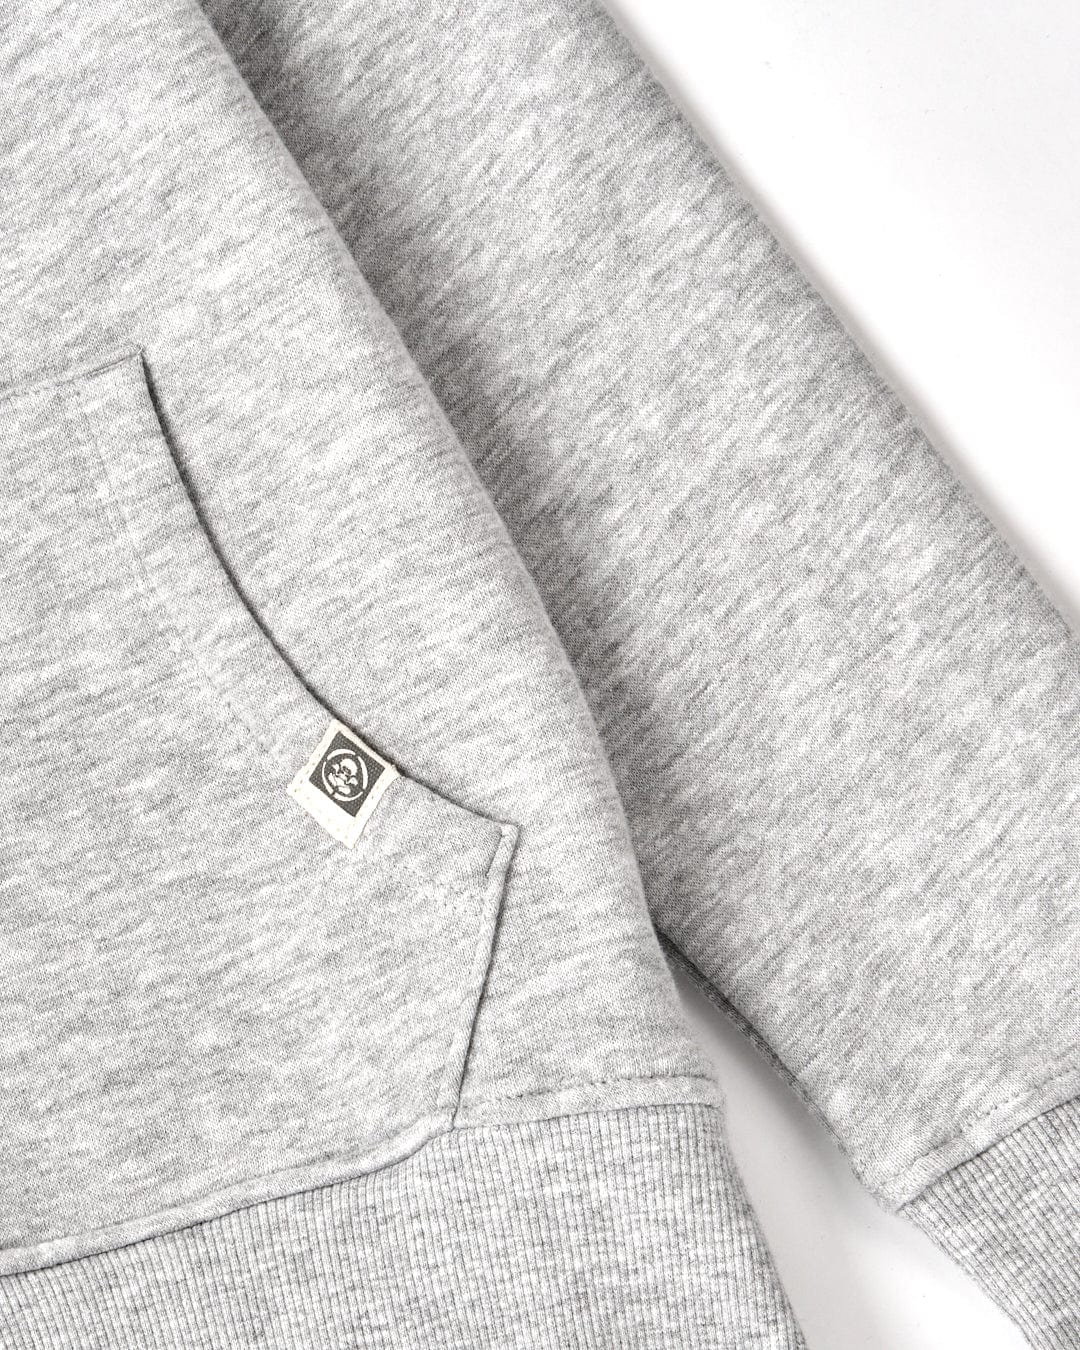 A Tok Corp - Kids Zip Hoodie - Grey with the brand name Saltrock on it.